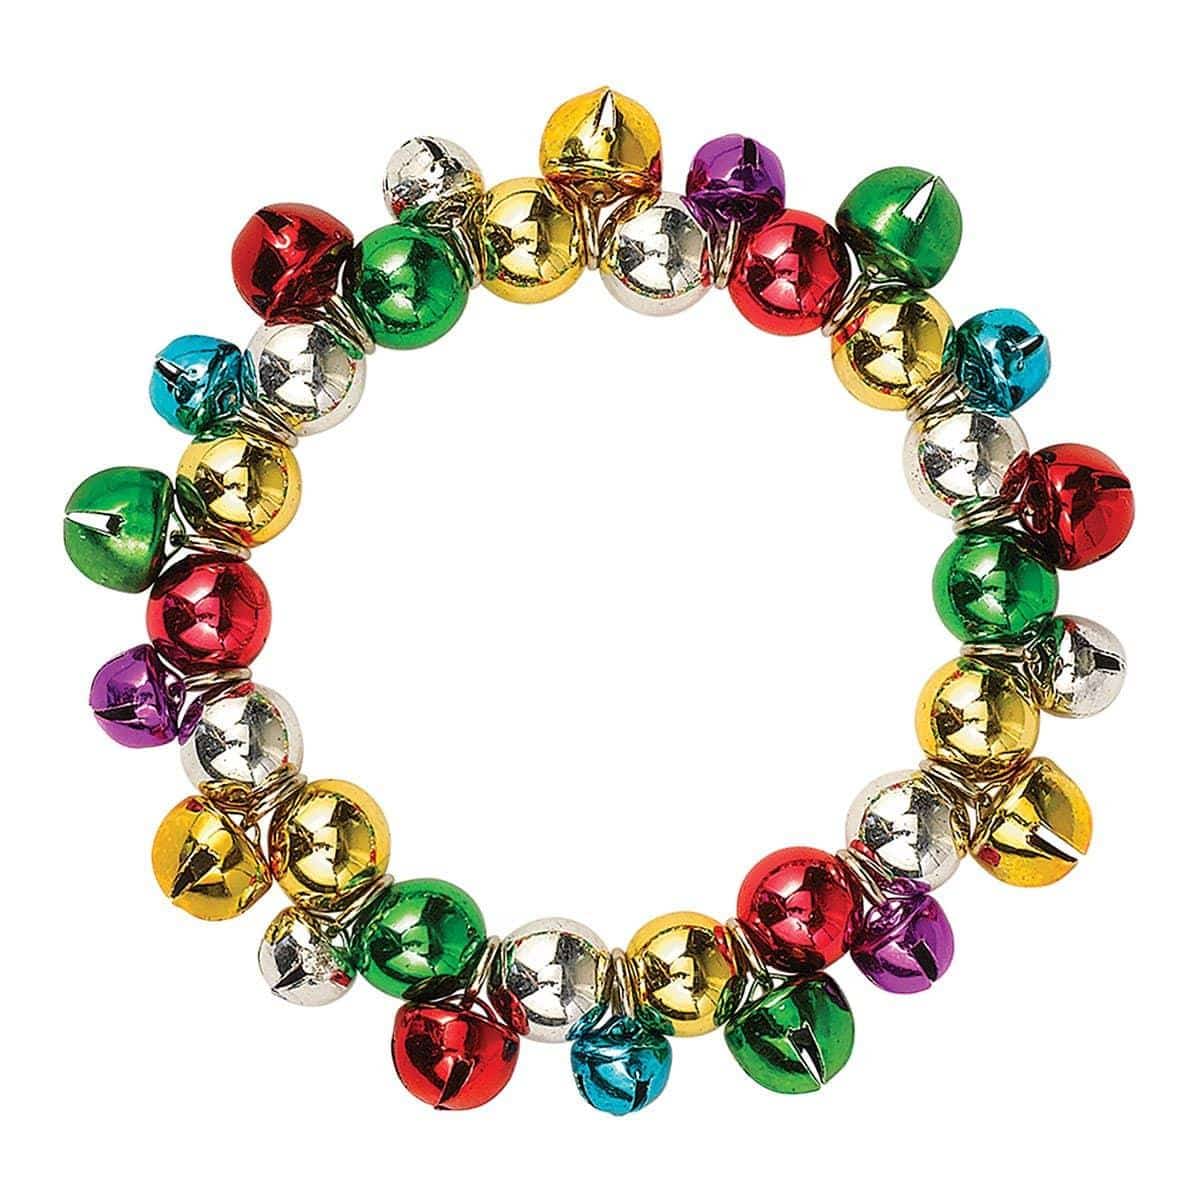 Buy Christmas Jingle Bell Bracelet sold at Party Expert